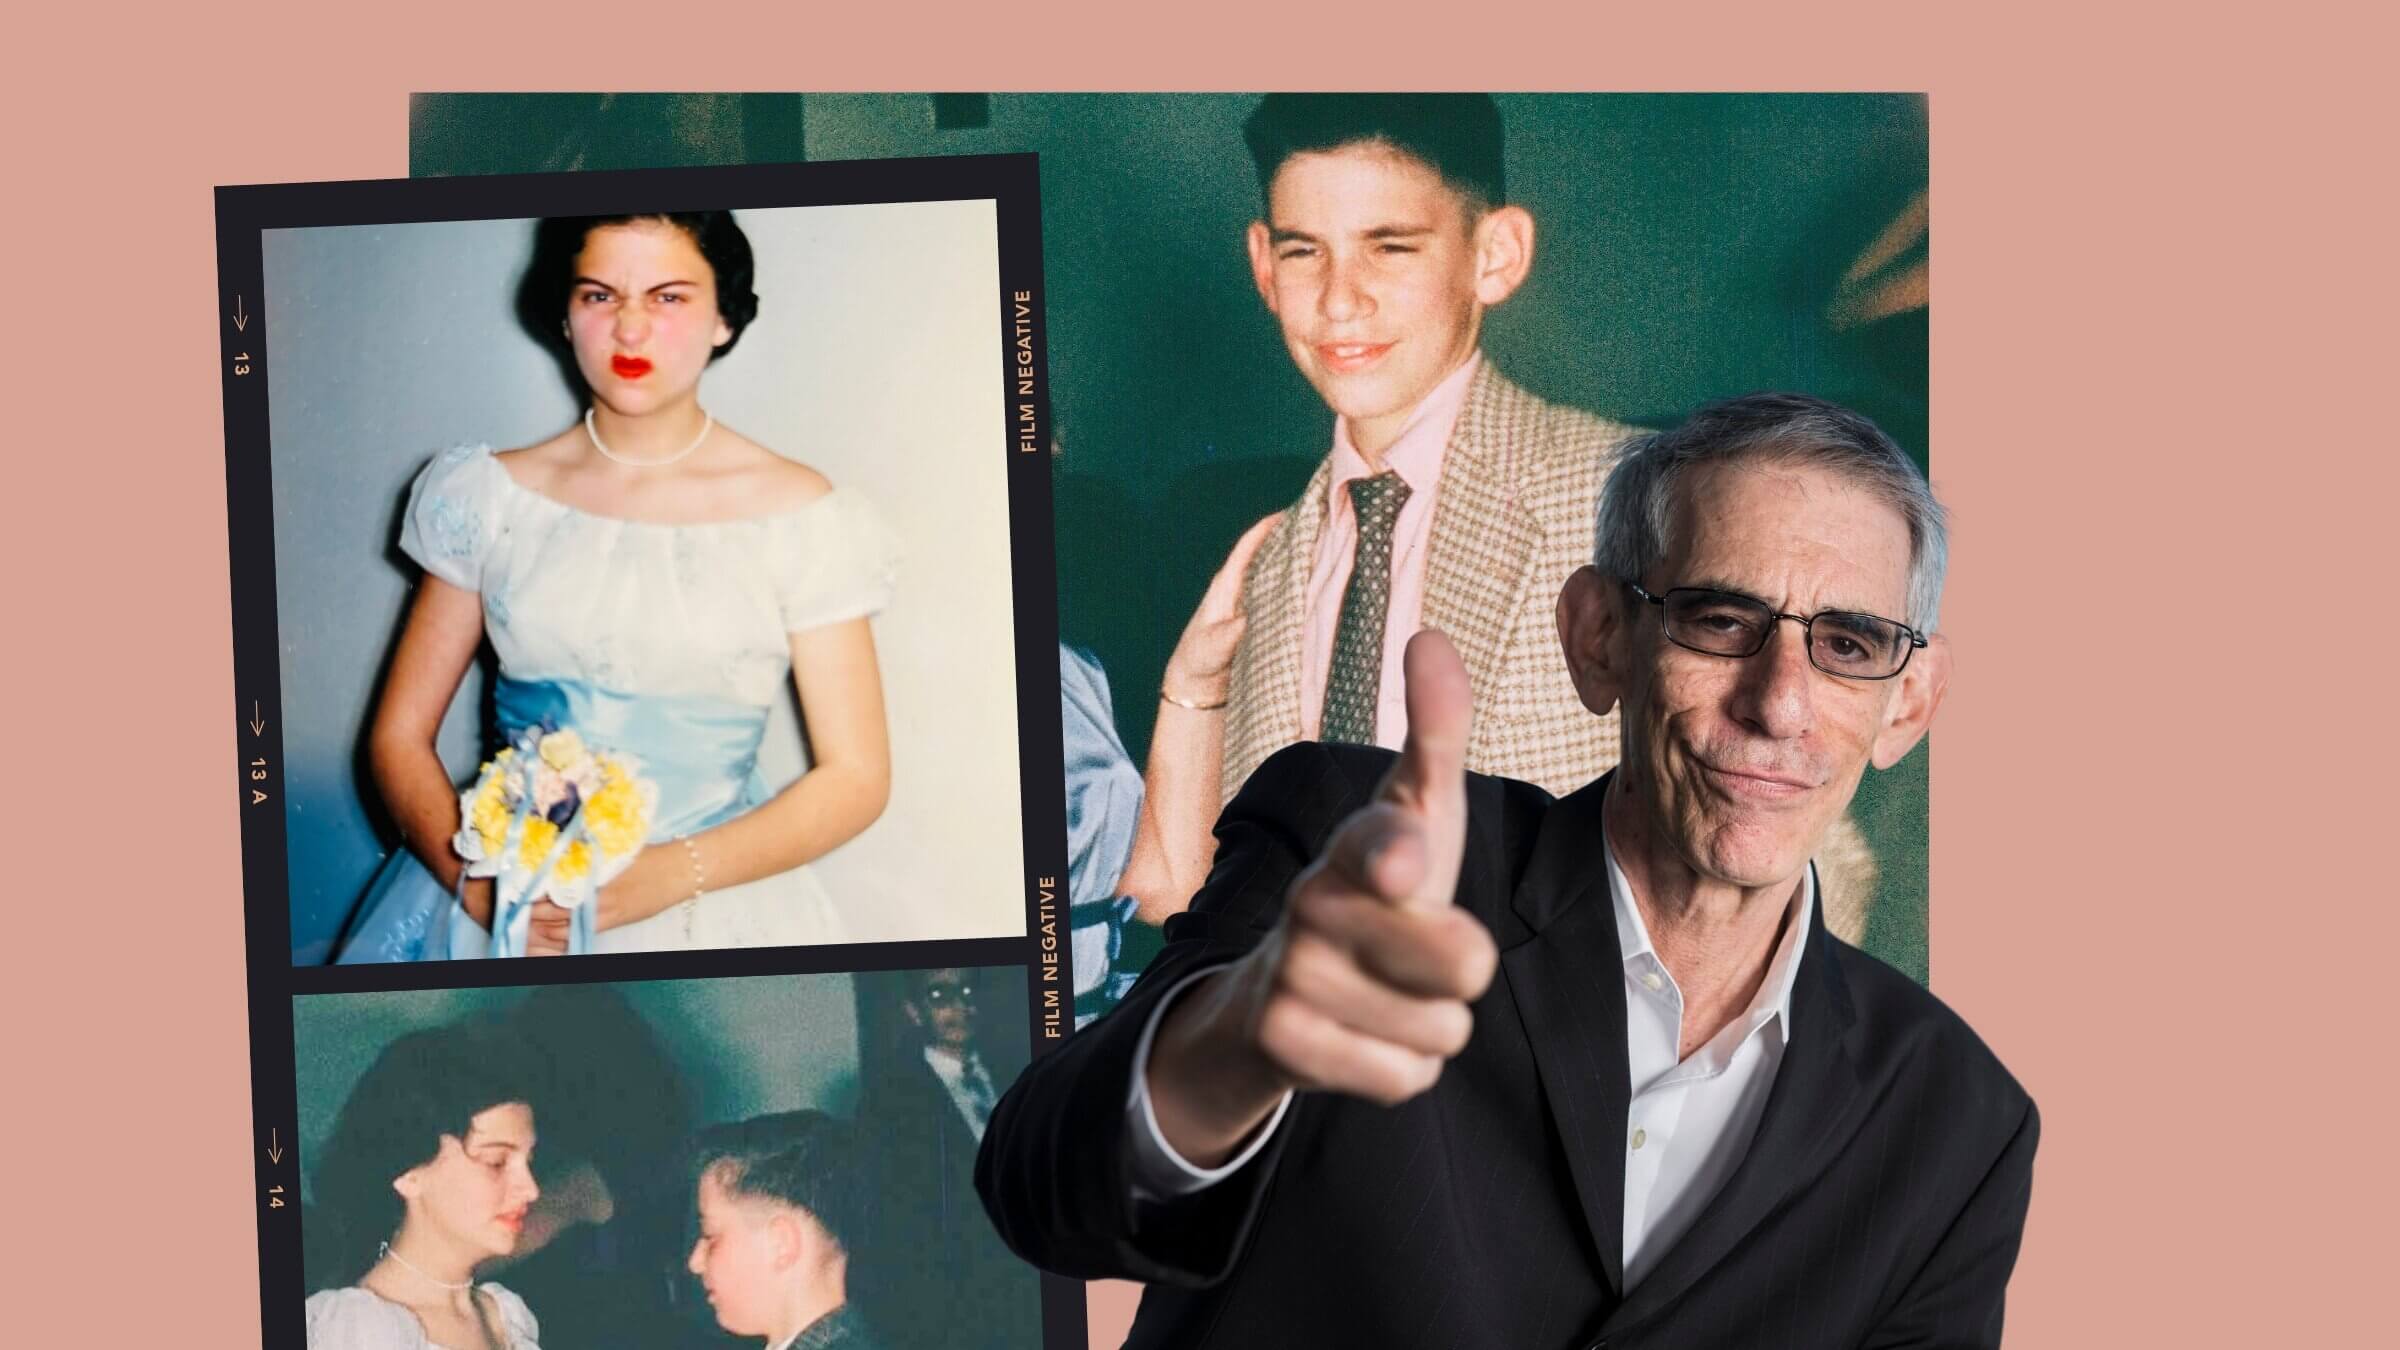 Clockwise from left to right, Roberta Schine at her bat mitzvah; a young Richard Belzer at Schine's party; Belzer in 2012, and Schine dancing with another guest.